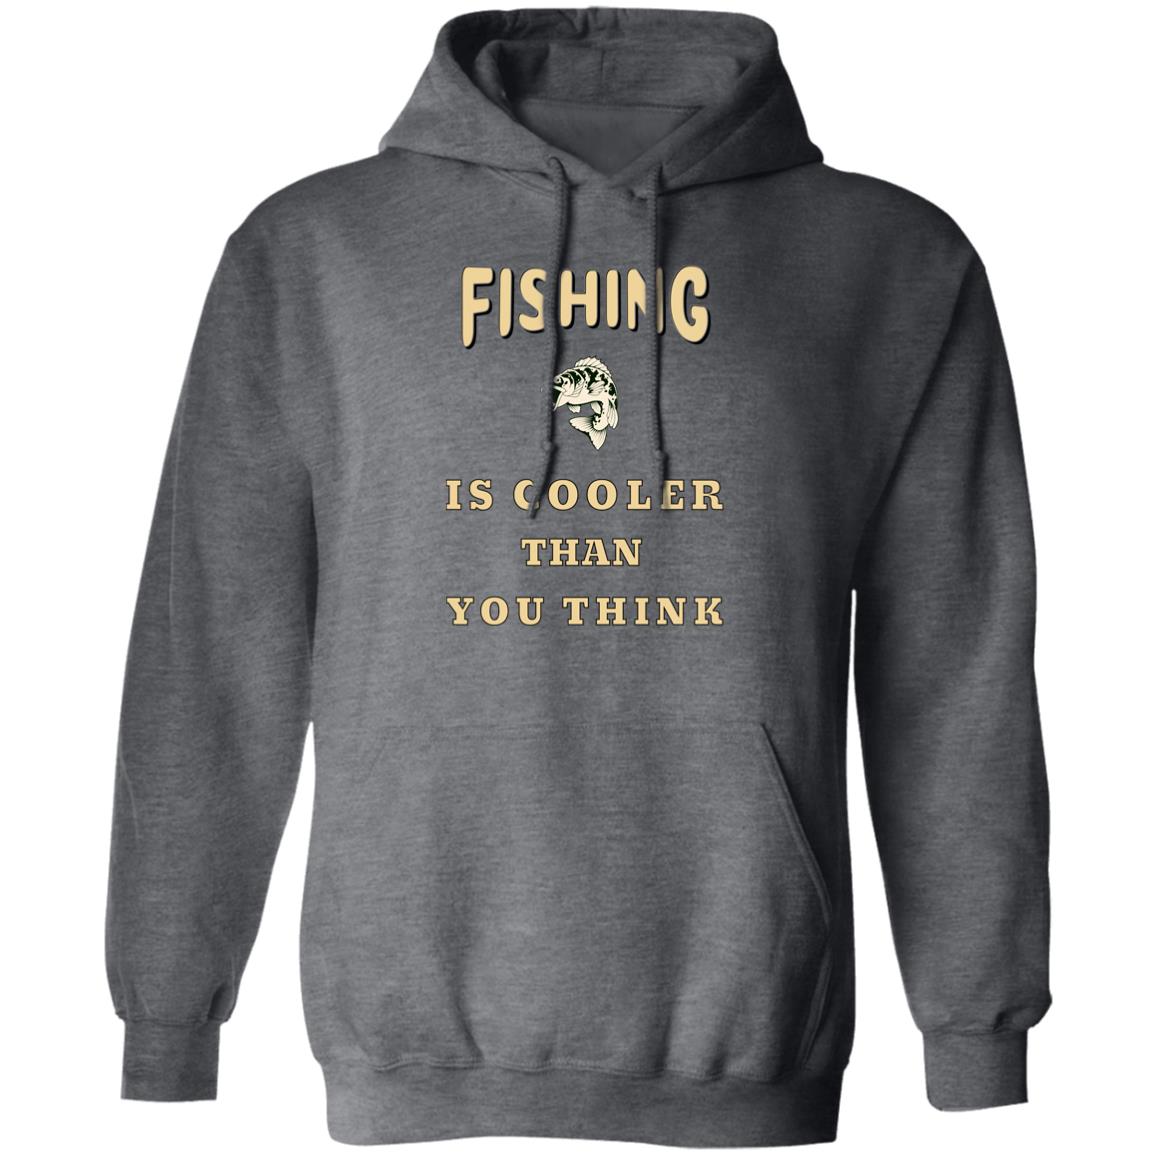 Fishing is cooler than you think pullover hoodie k dark-heather